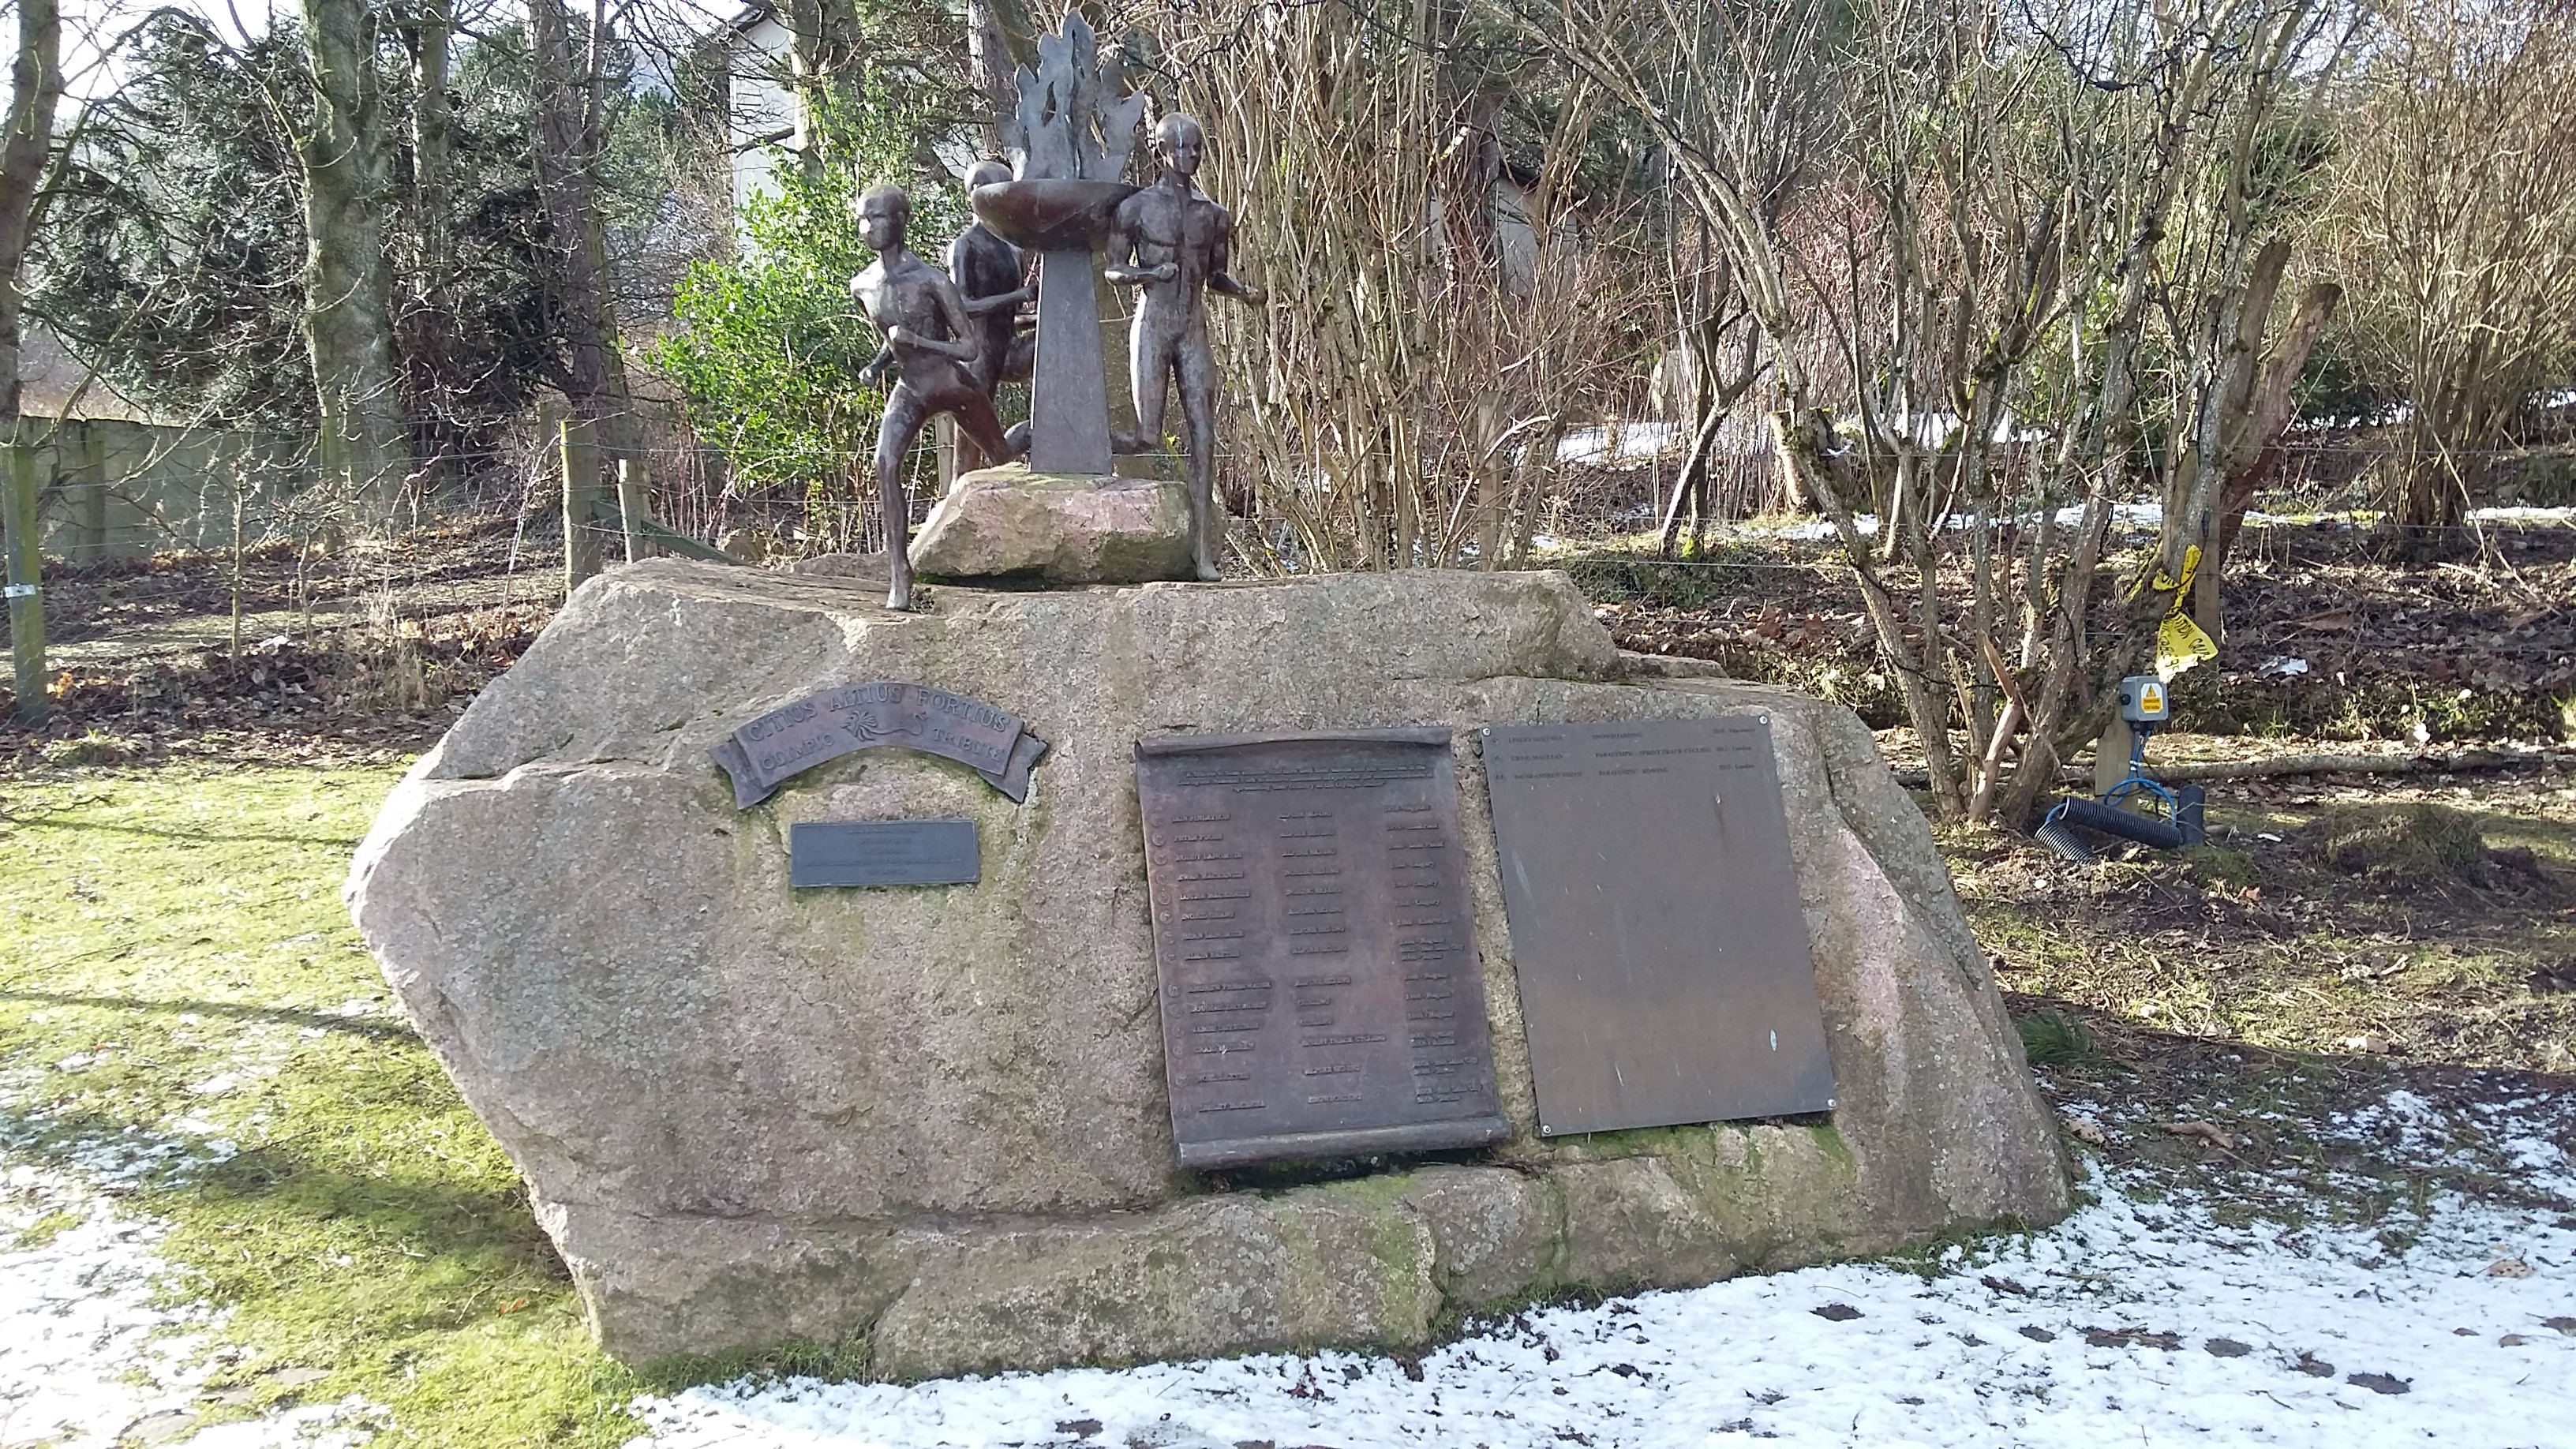 A monument with three figures surrounding the Olympic flame, cast in bronze, stand atop a carved stone block. Two plaques, also cast in bronze, with the names of olympians from the area are attached to the memorial sculpture